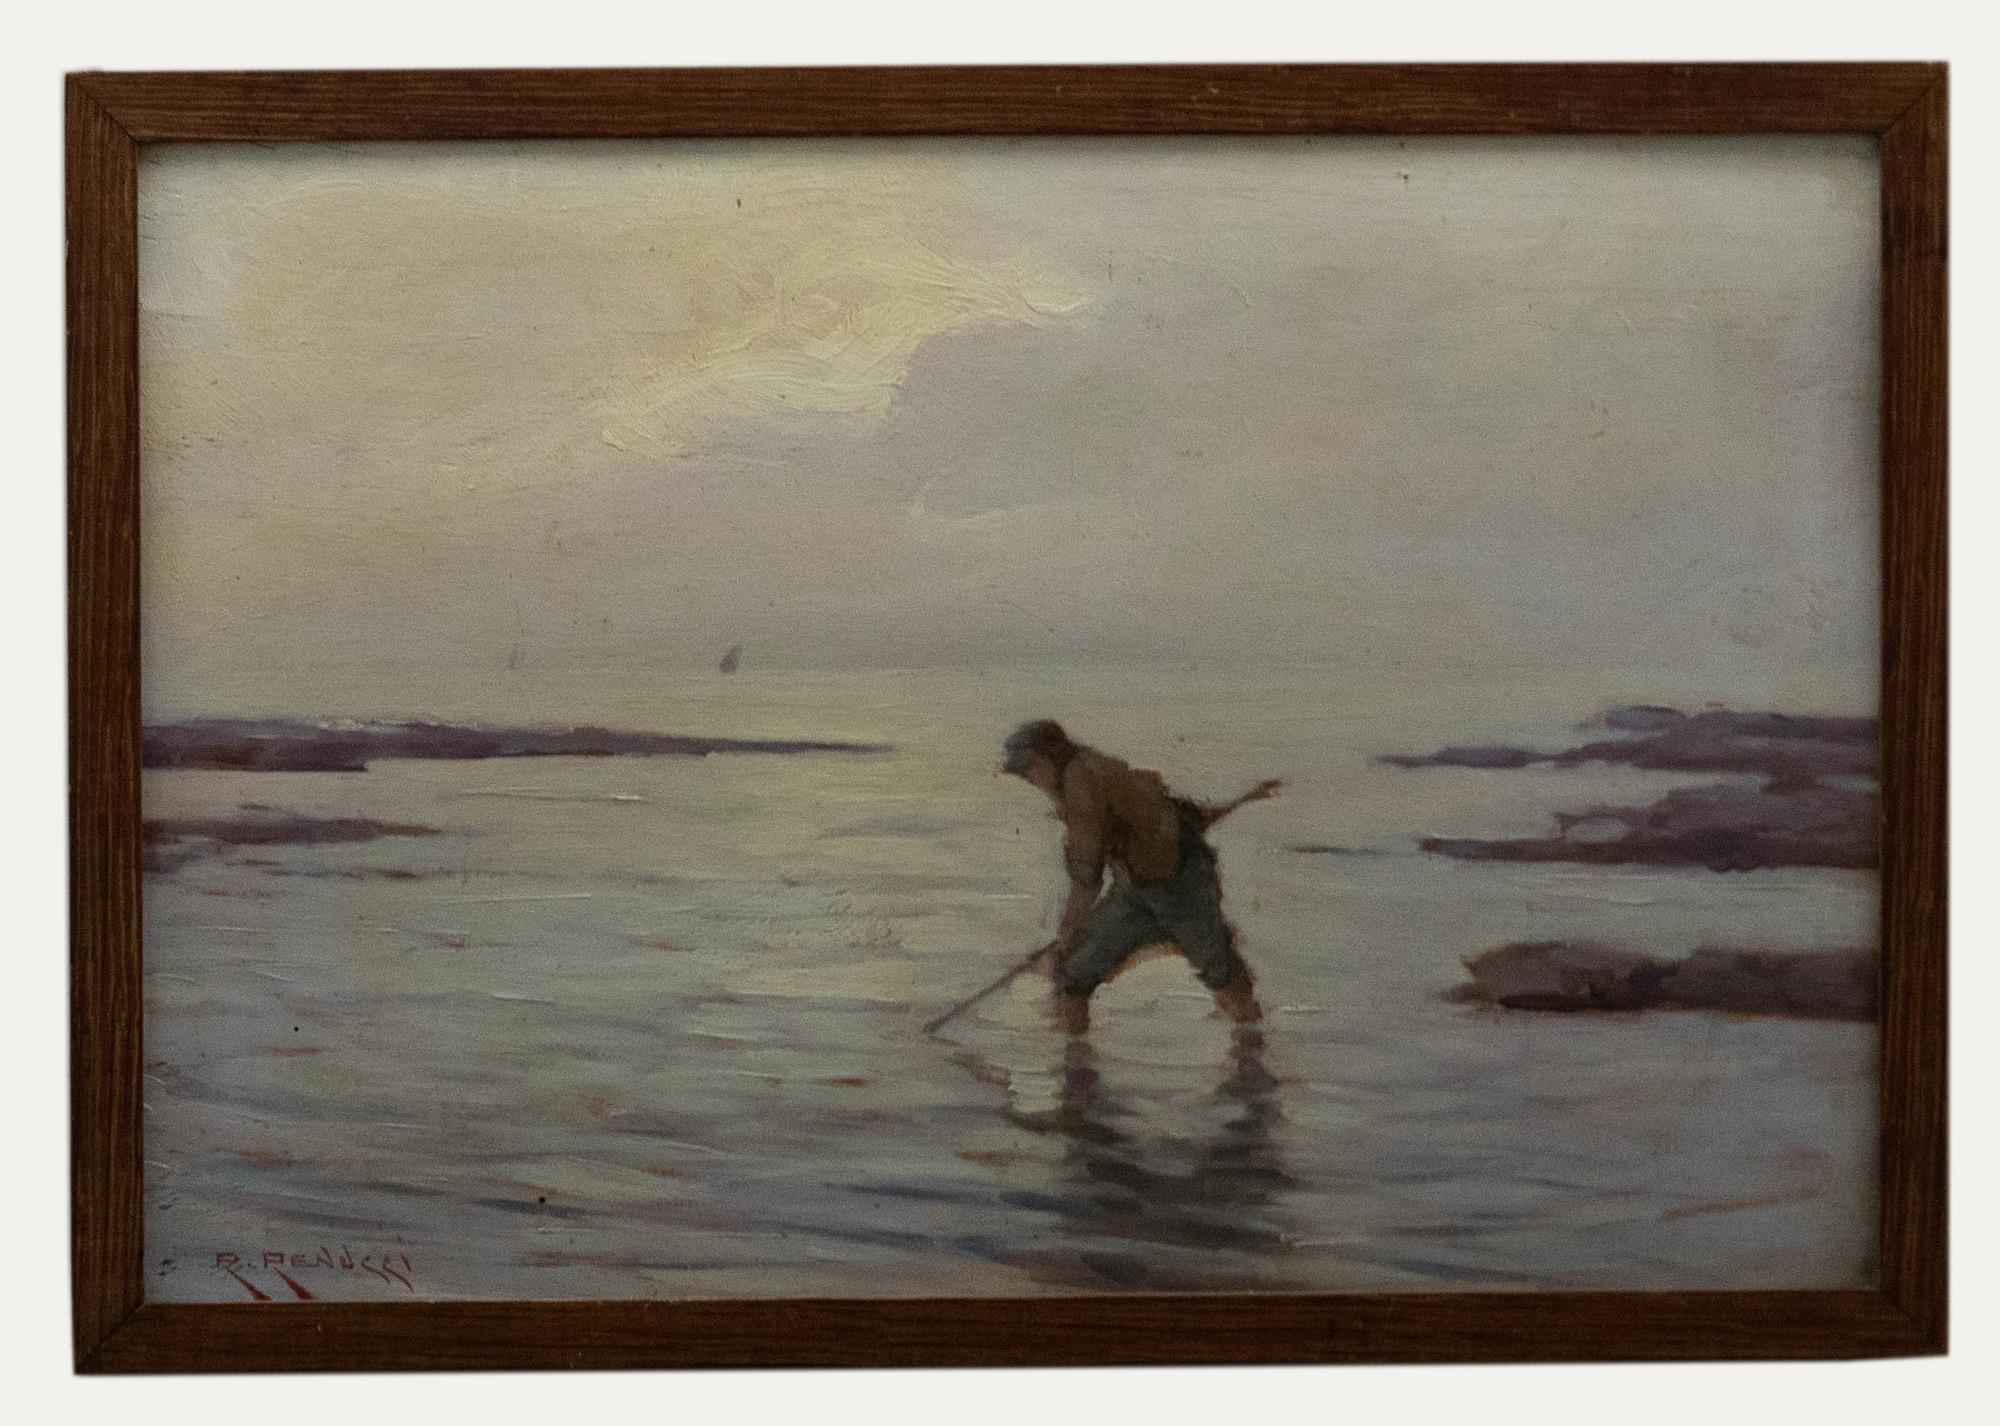 A charming Italian school oil study depicting a fisherman in shallow water. On the horizon the sun begins to set casting warm reflections across the calm sea. Signed to the lower right. Presented in a wooden frame. On board.